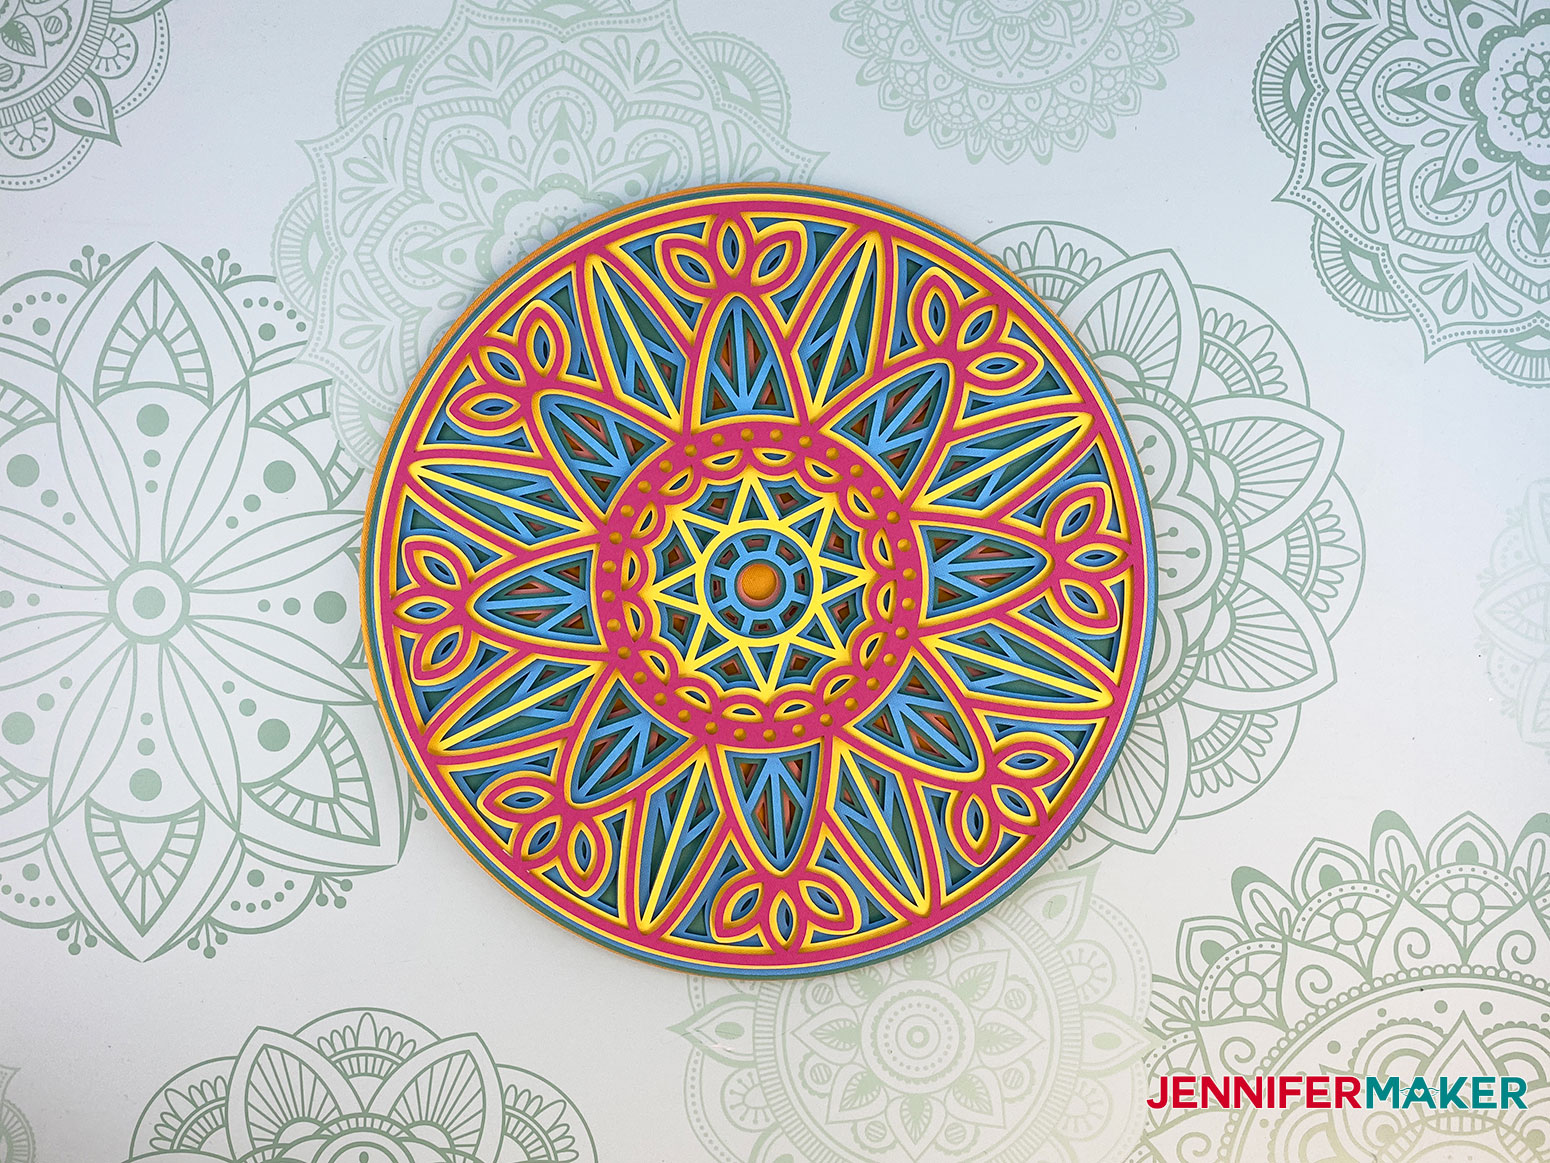 This is a completed six-layer mandala from cardstock